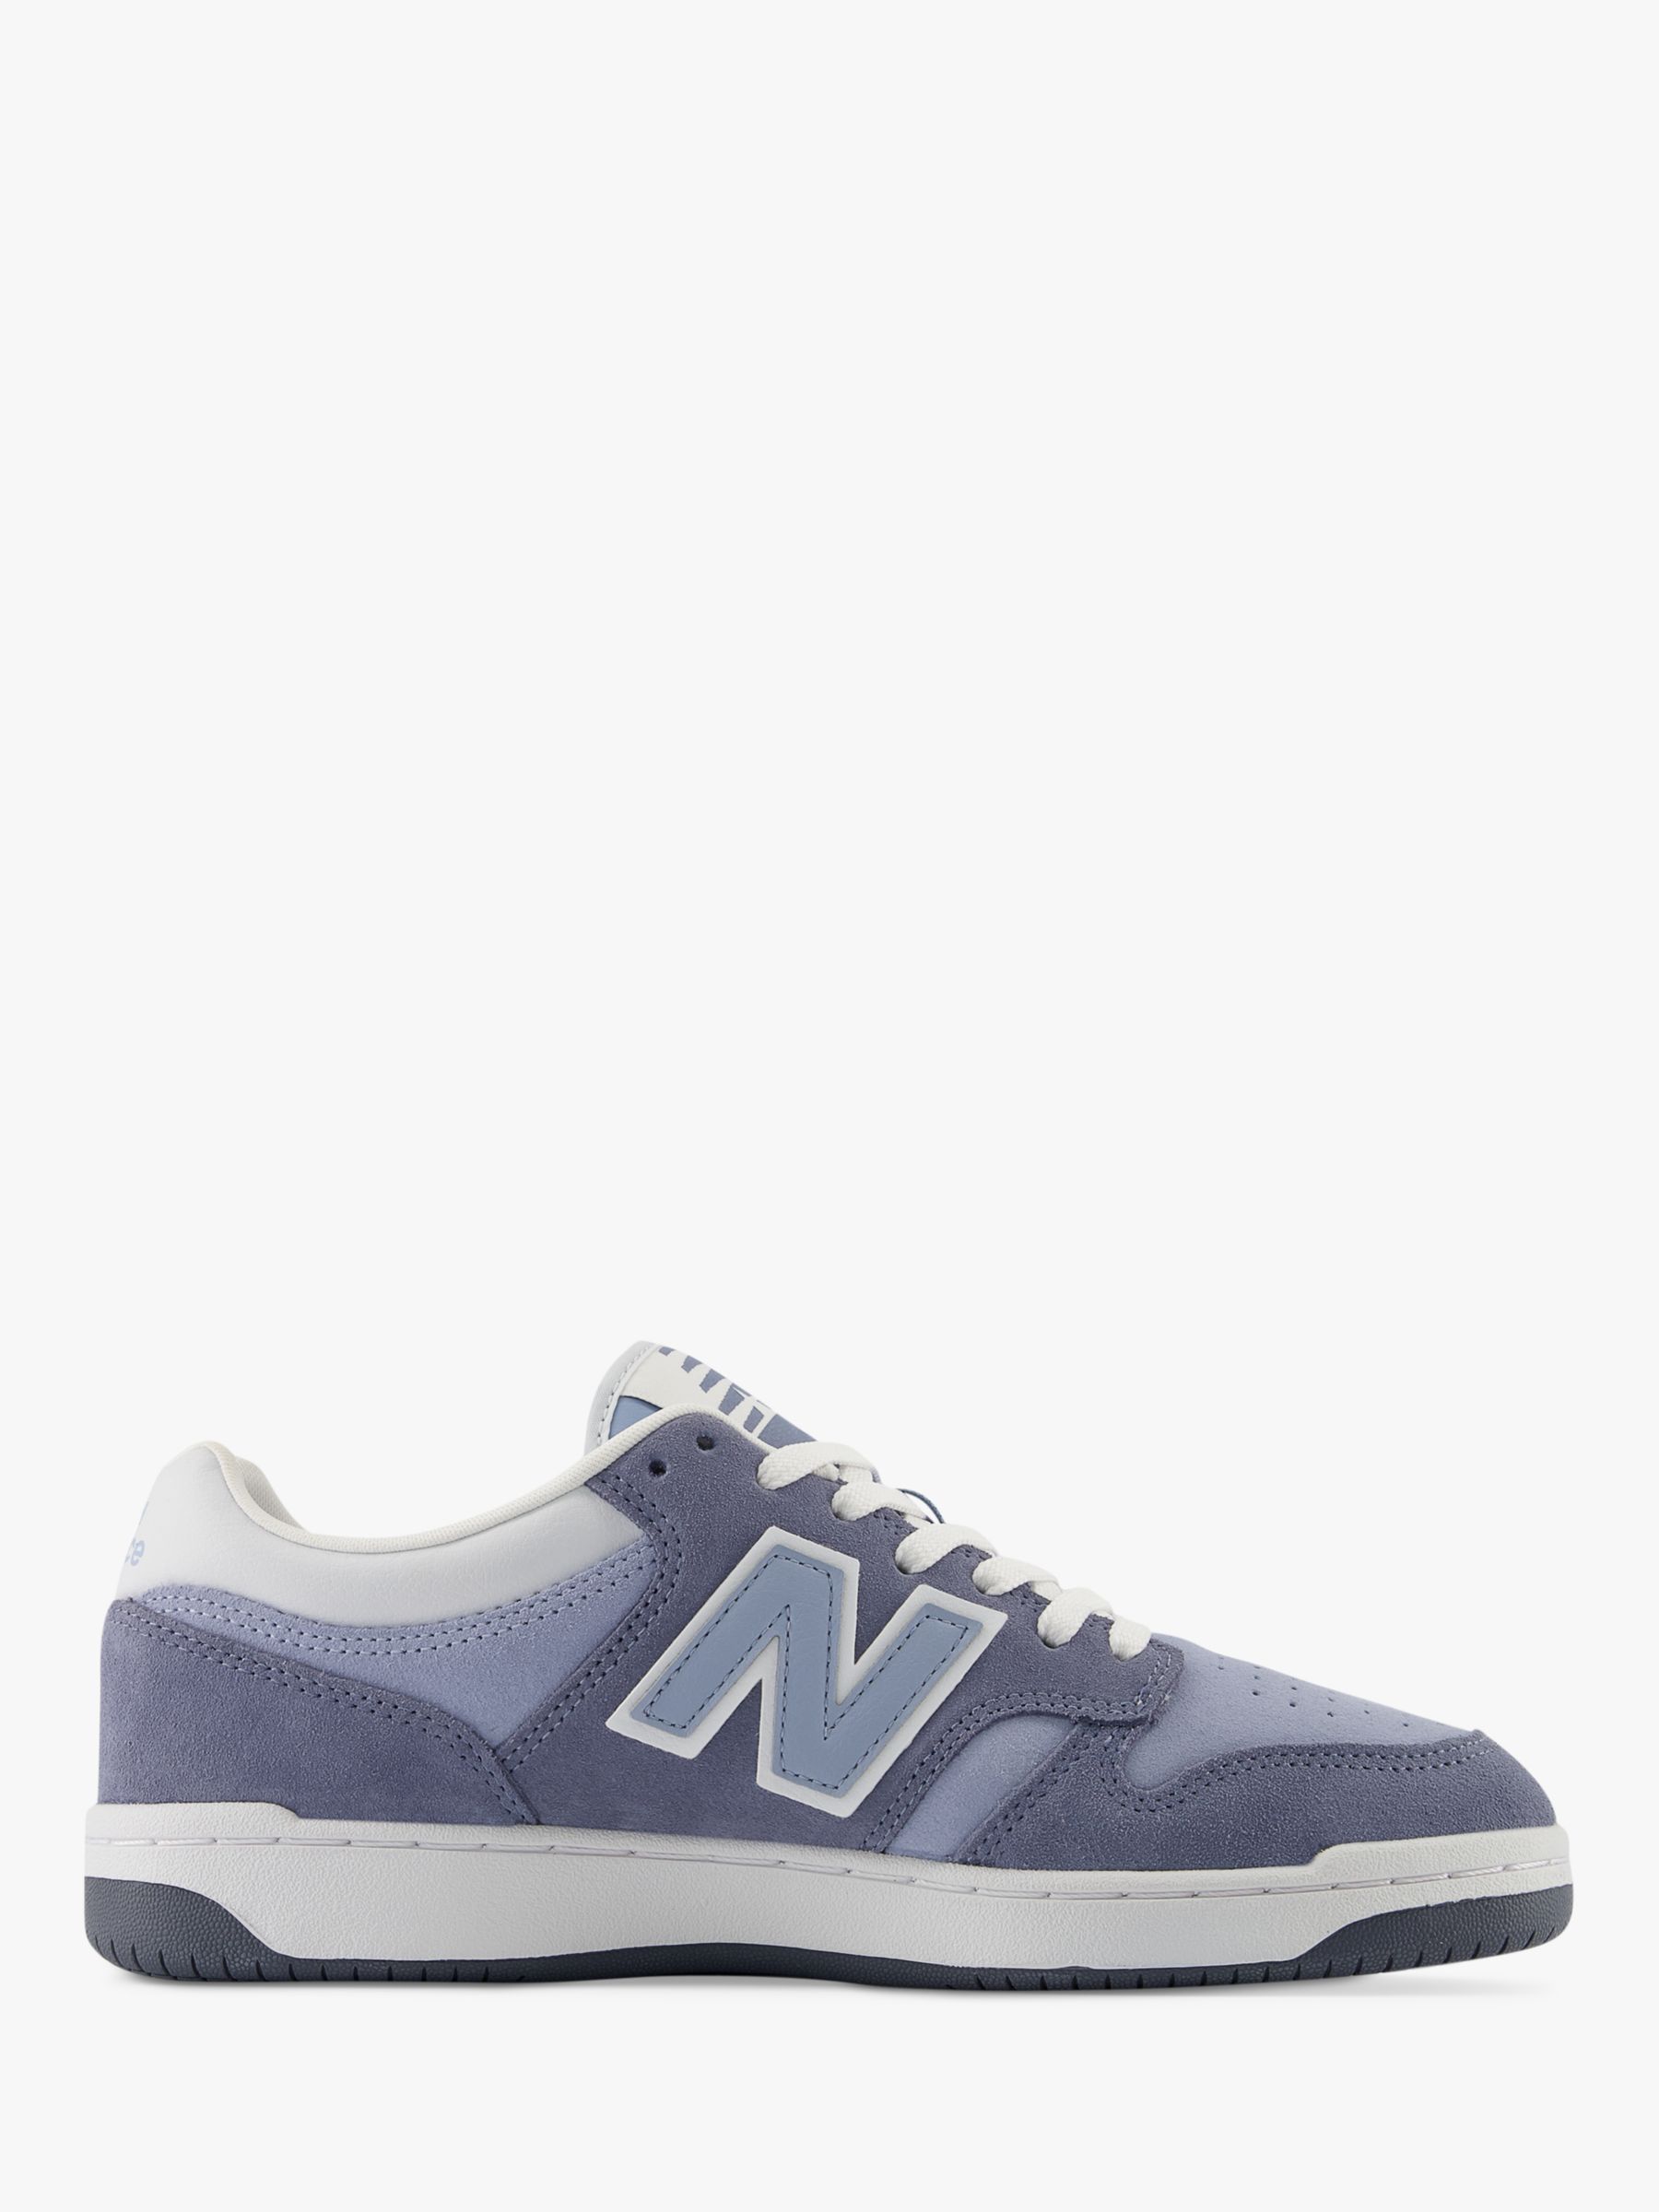 New Balance 480 Lace Up Trainers, Grey/Multi, 7